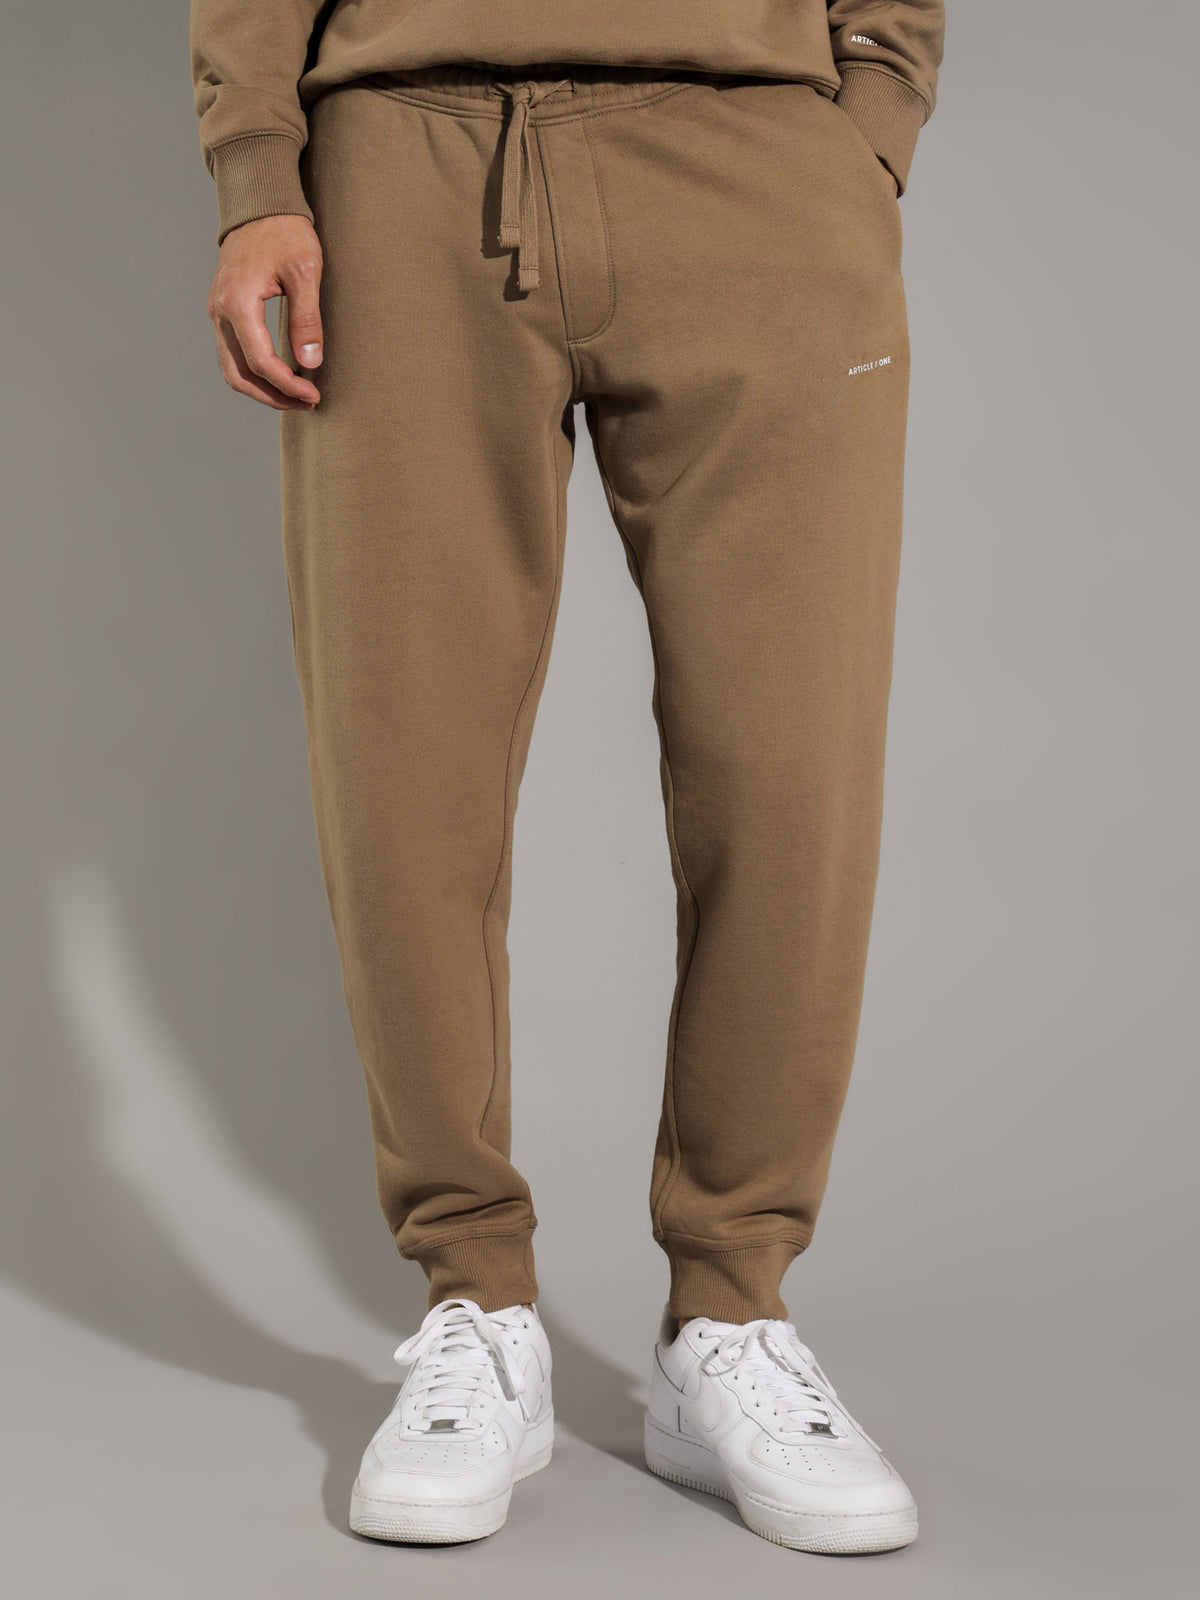 Classic Track Pants in Latte